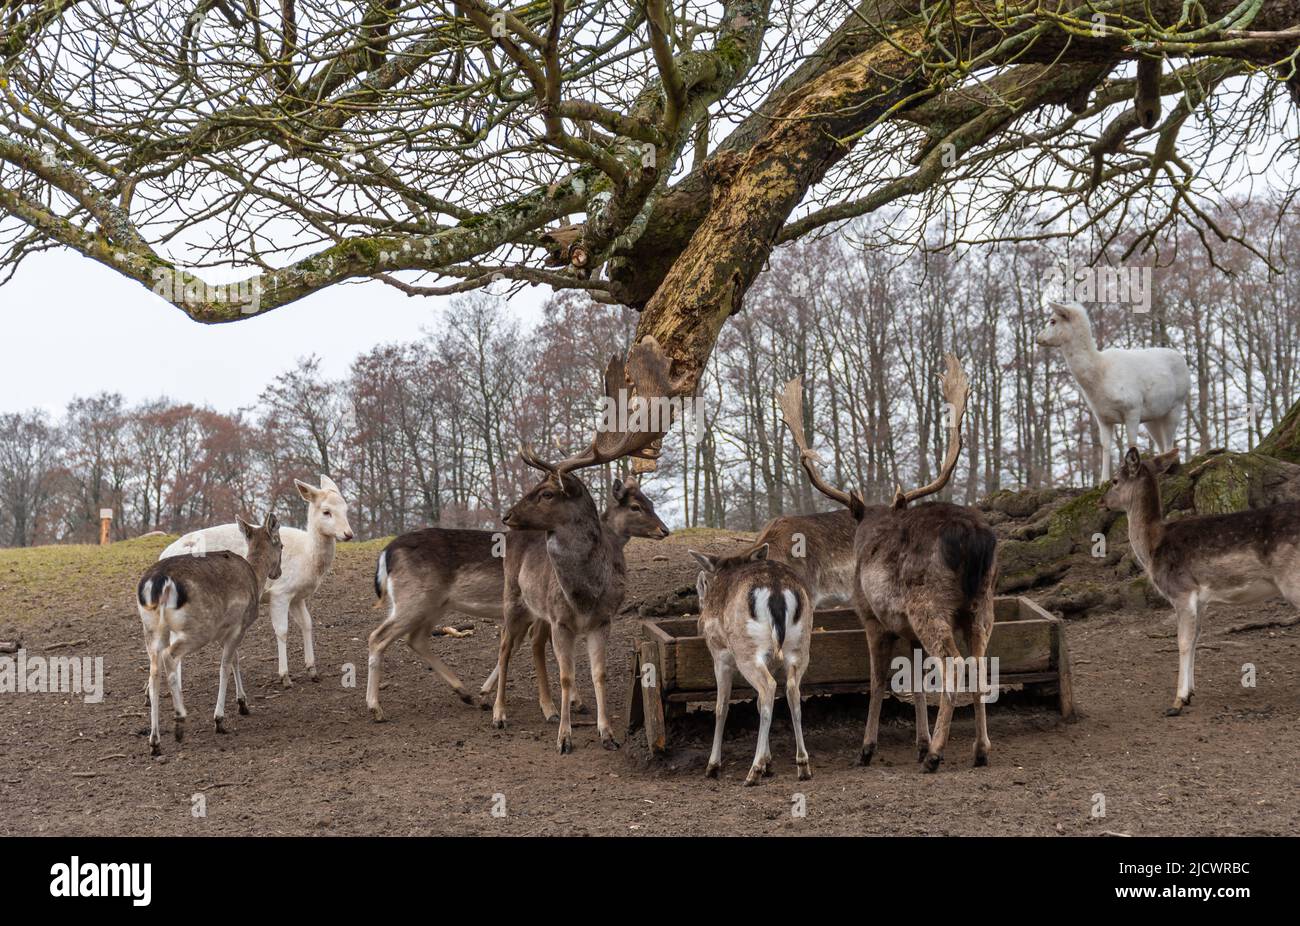 Fallow deer in an outdoor enclosure at a feeding trough Stock Photo